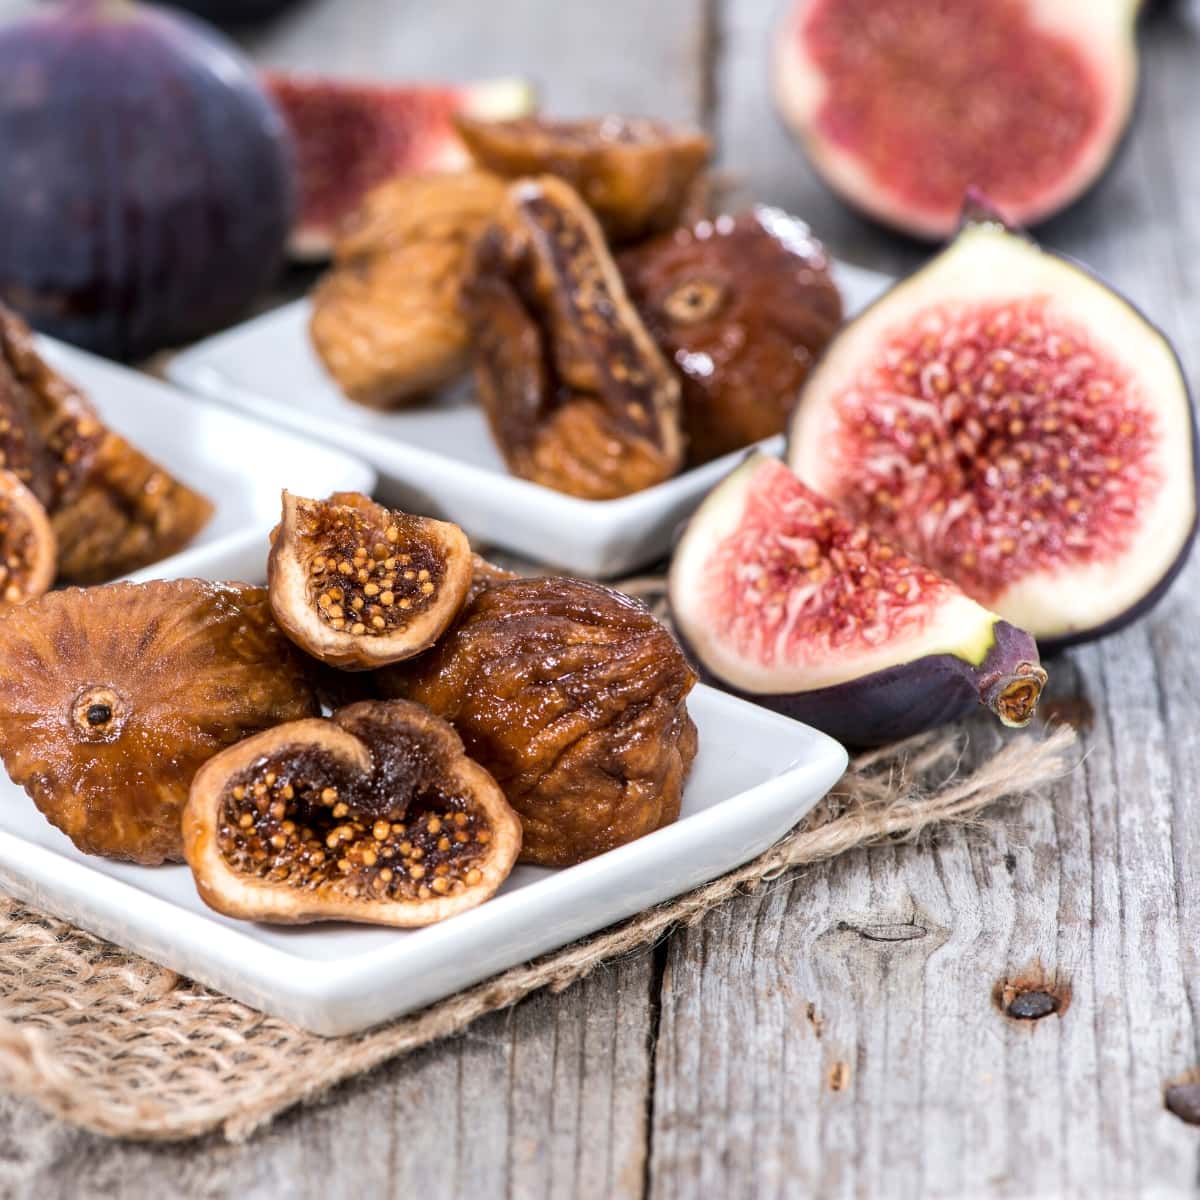 Fresh and dried figs resting on white plates on a wooden table.